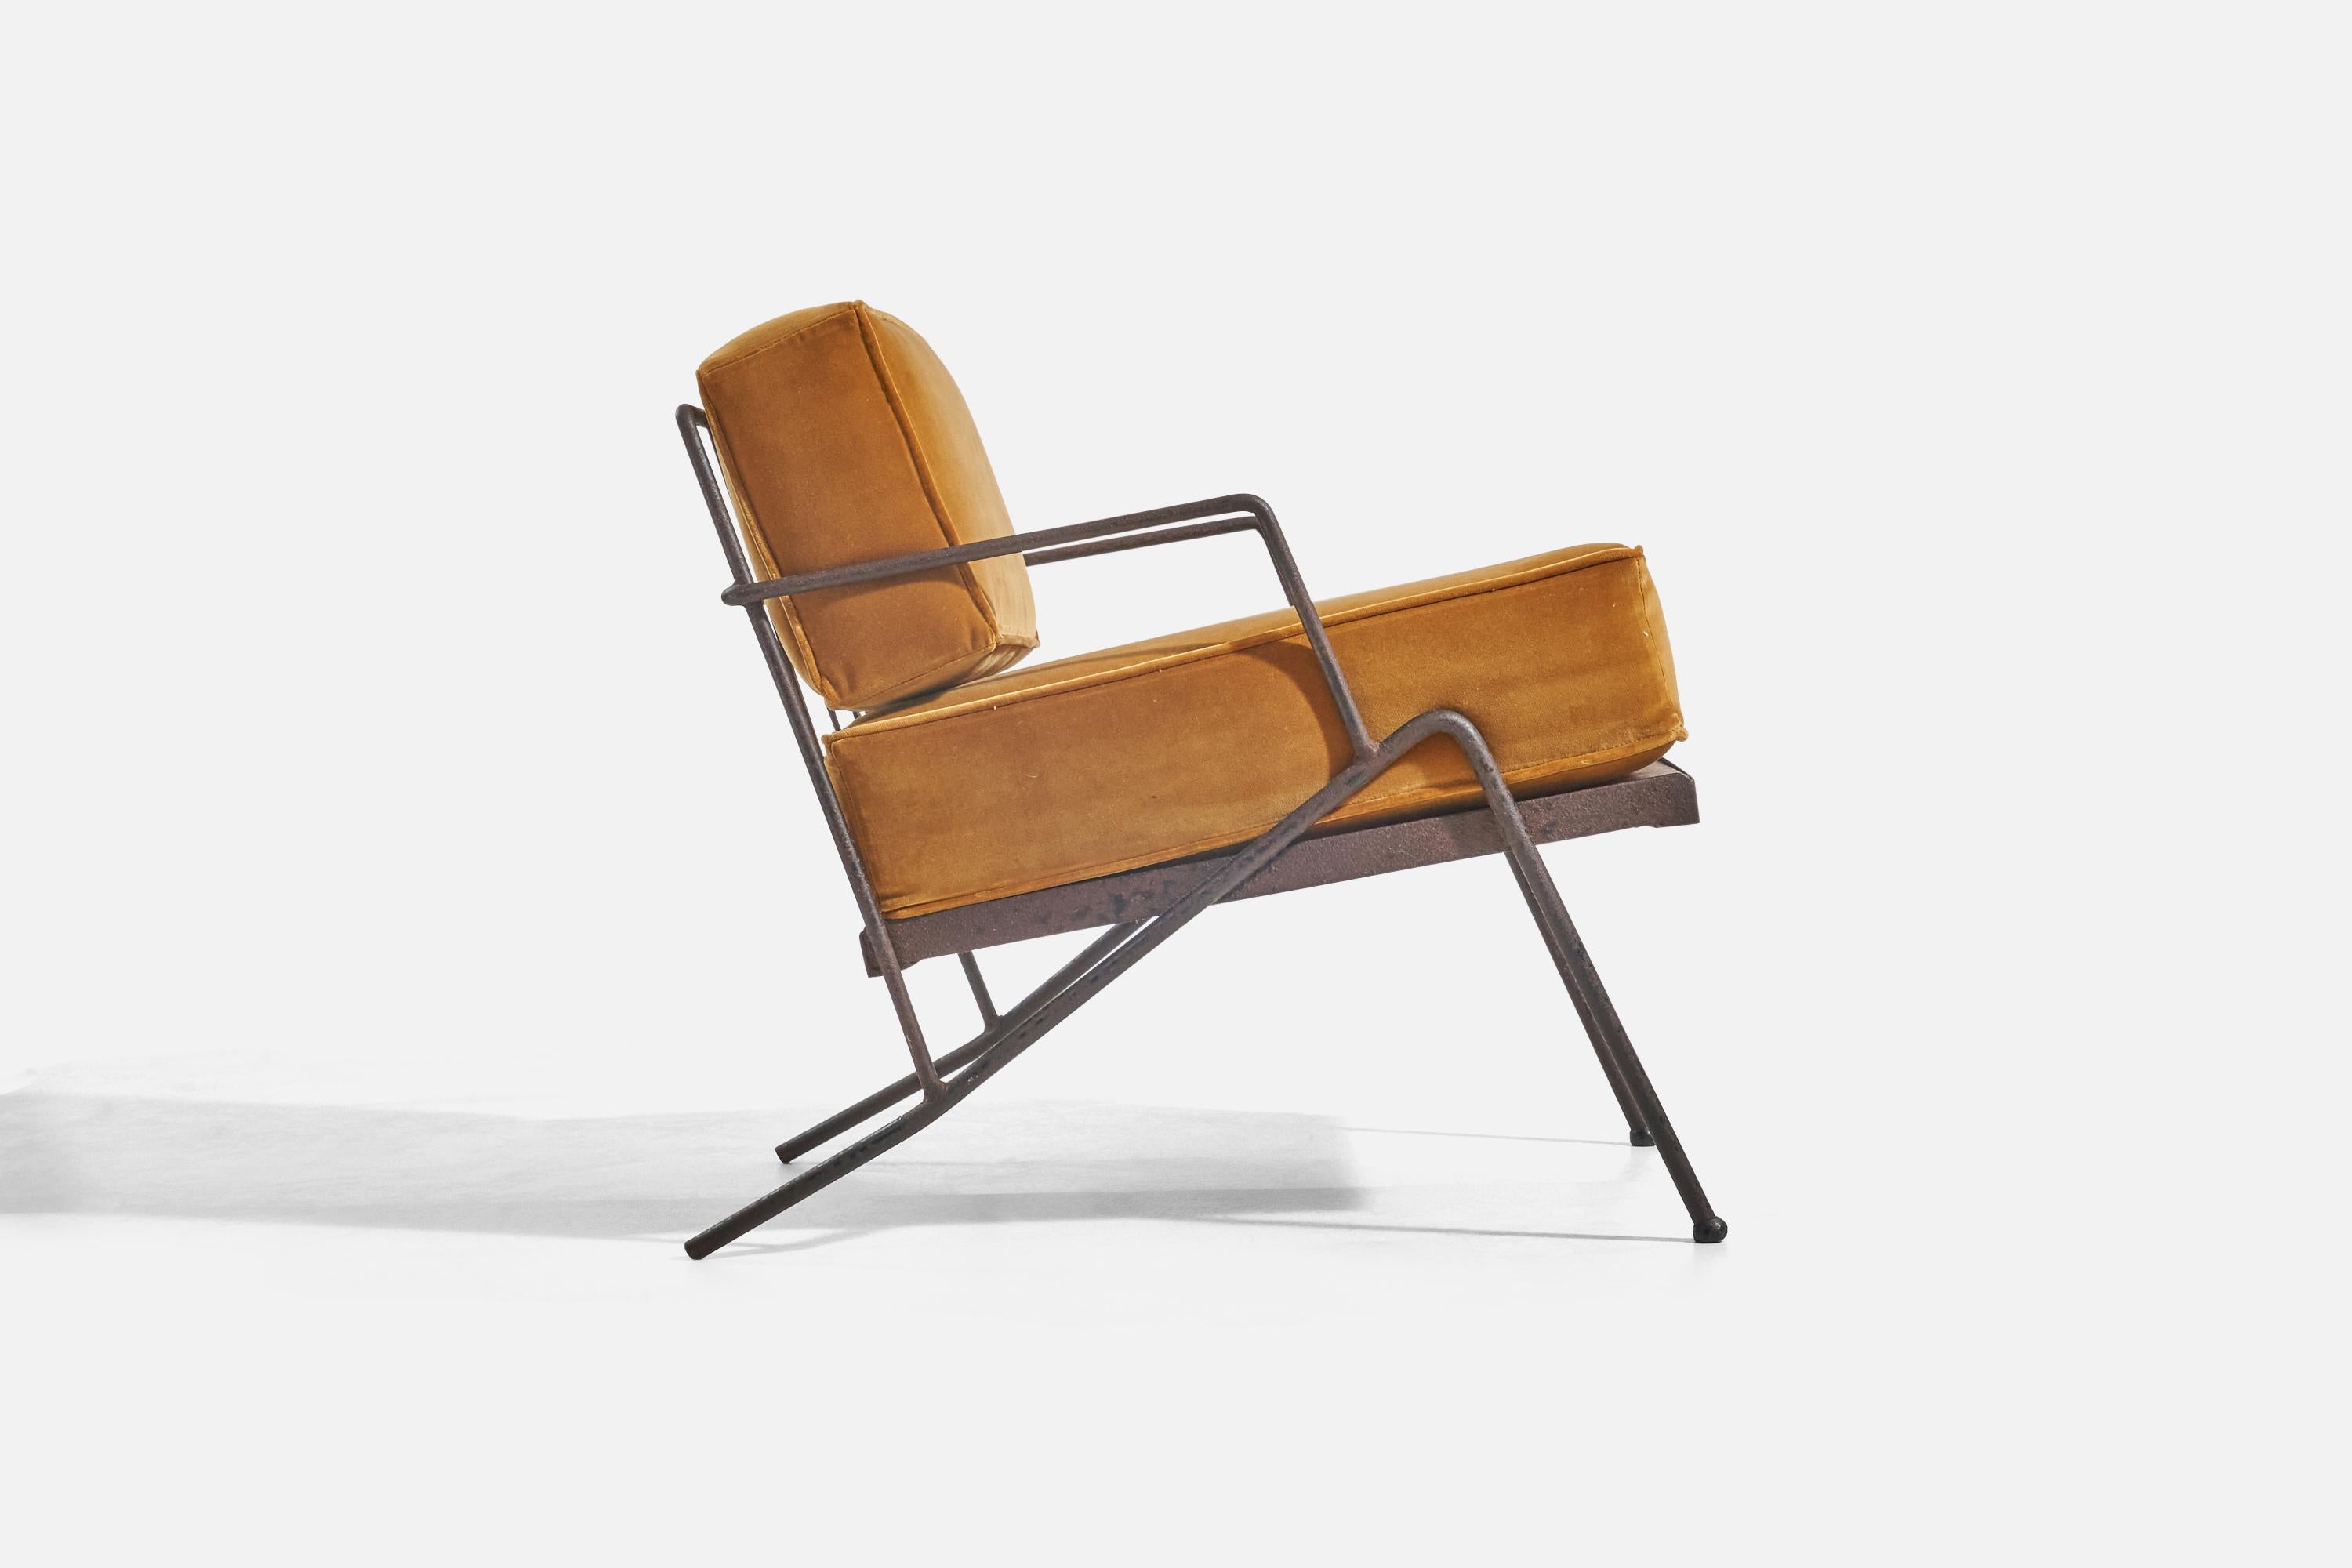 Mid-20th Century American Designer, Lounge Chair, Metal, Wood, Yellow Velvet, USA, 1940s For Sale